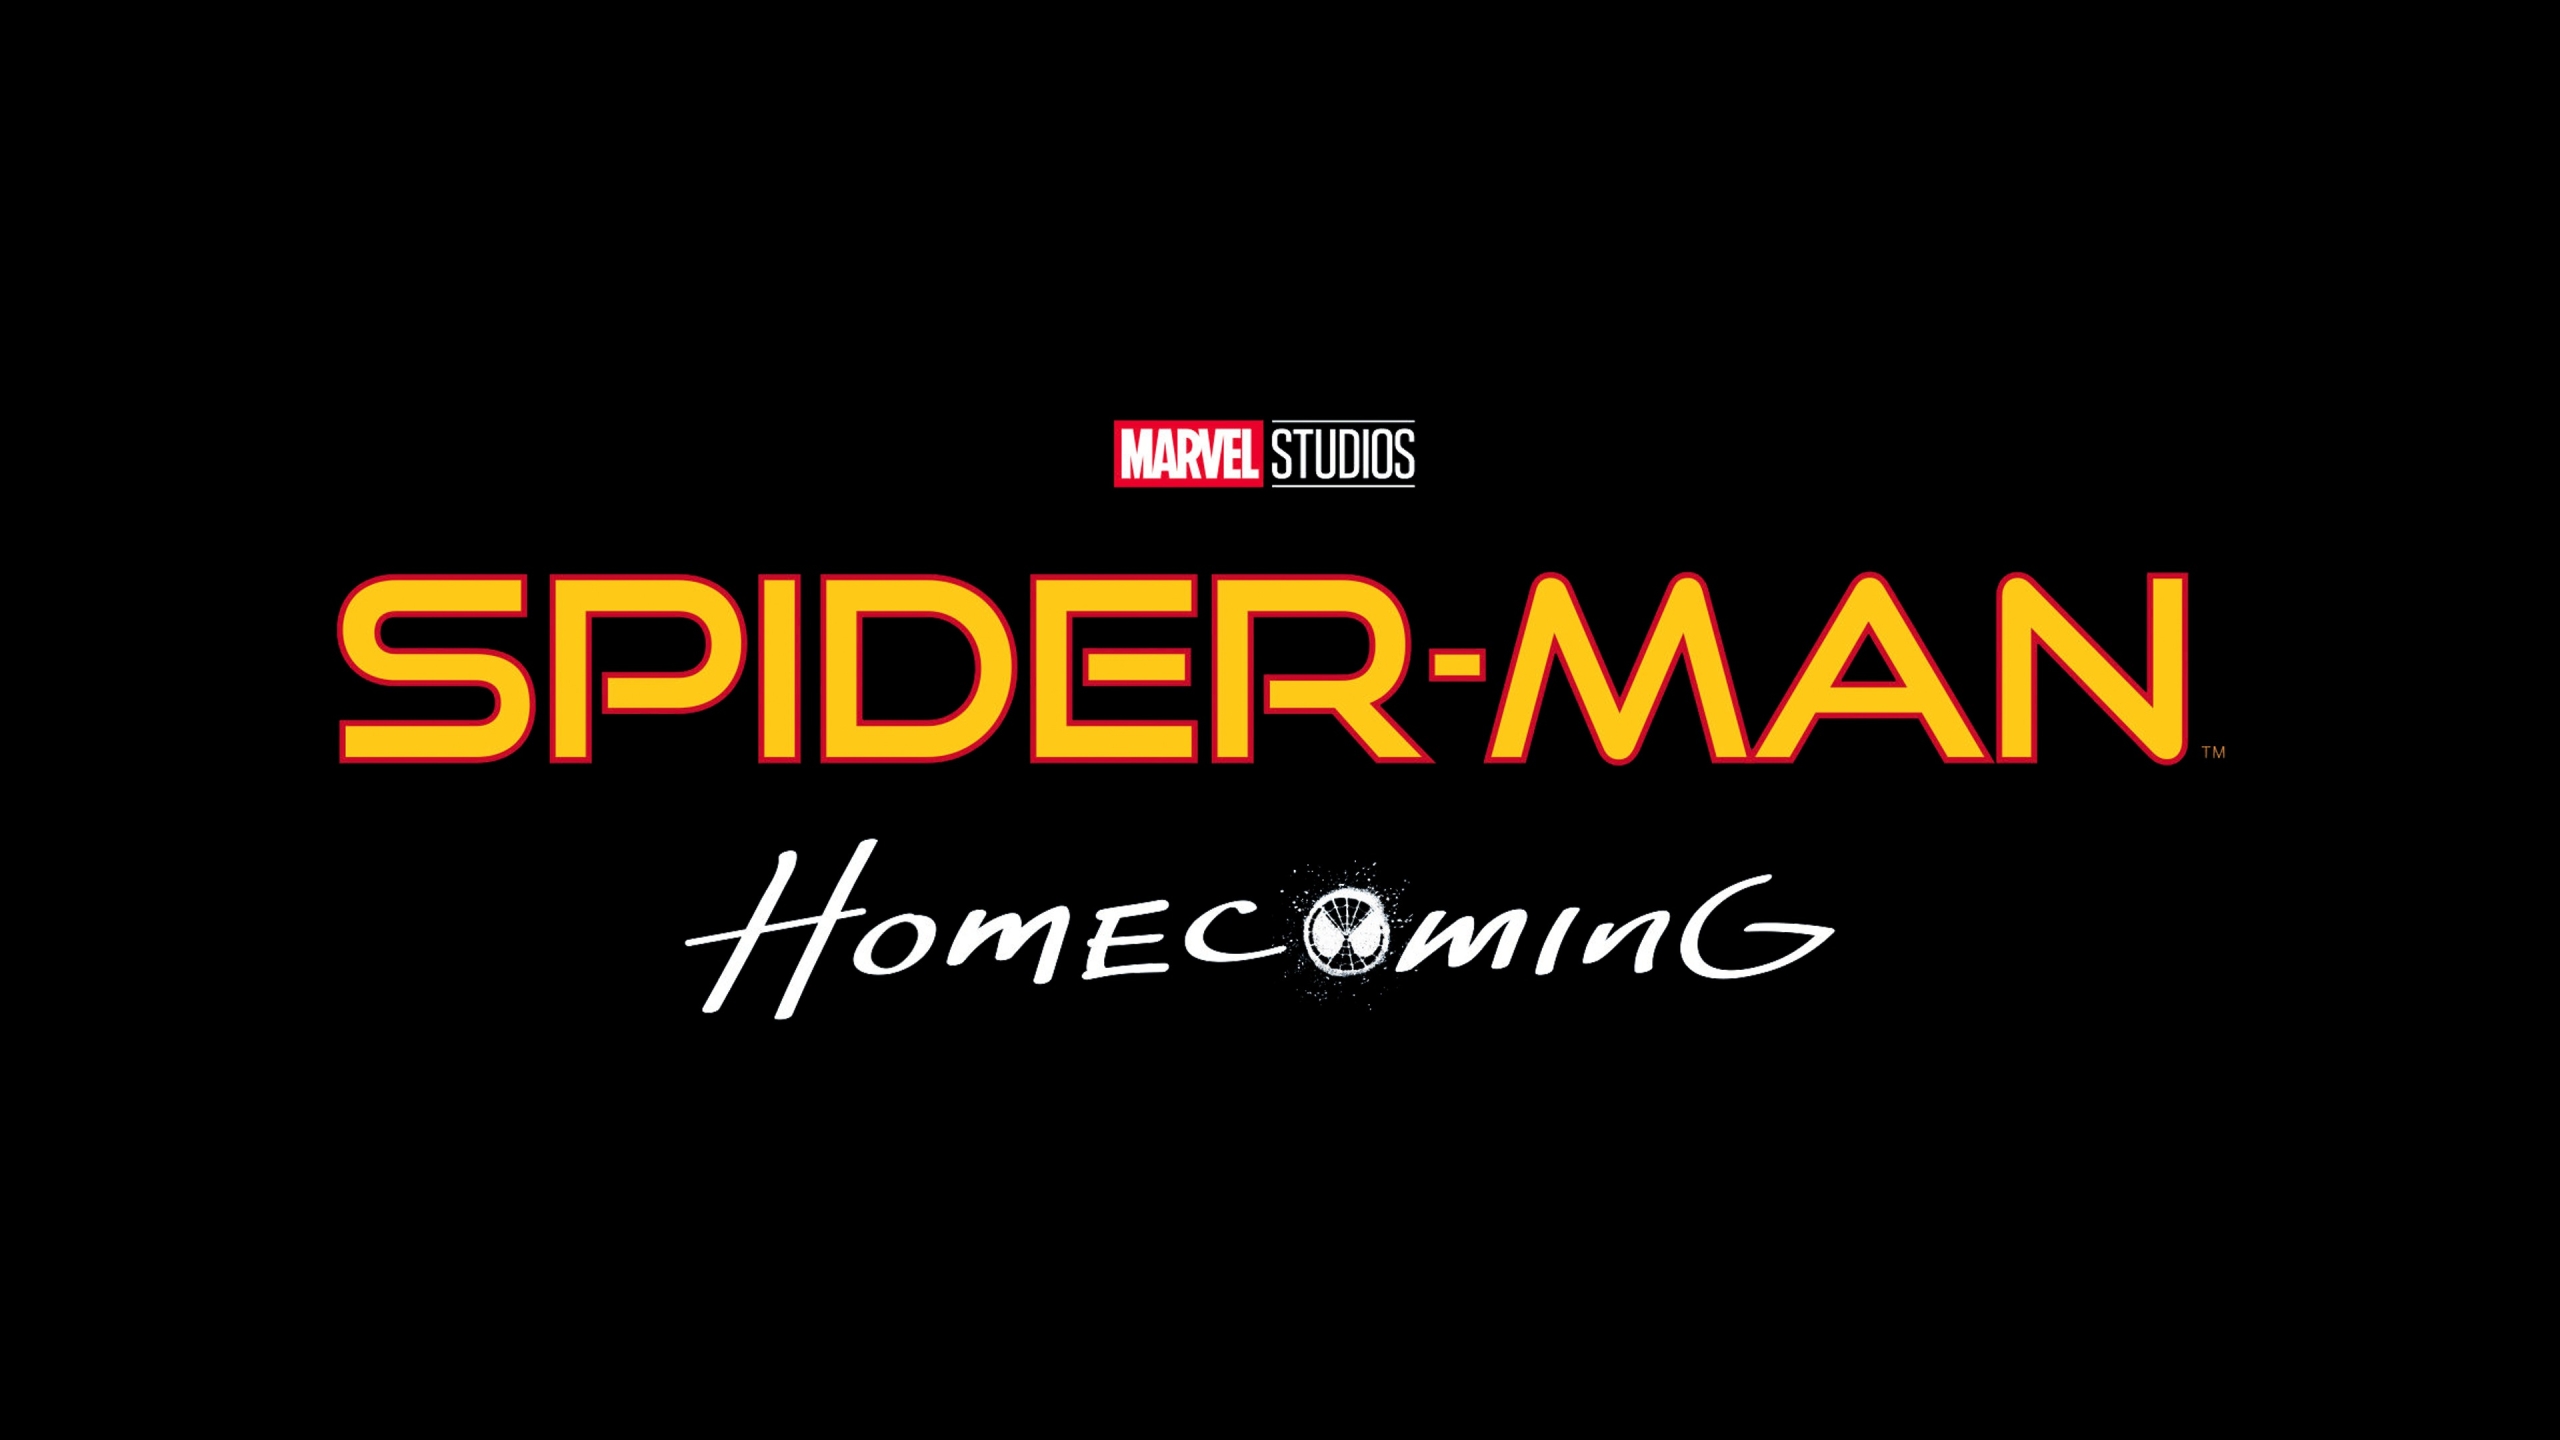 Spiderman Homecoming 2017 for 2560 x 1440 HDTV resolution